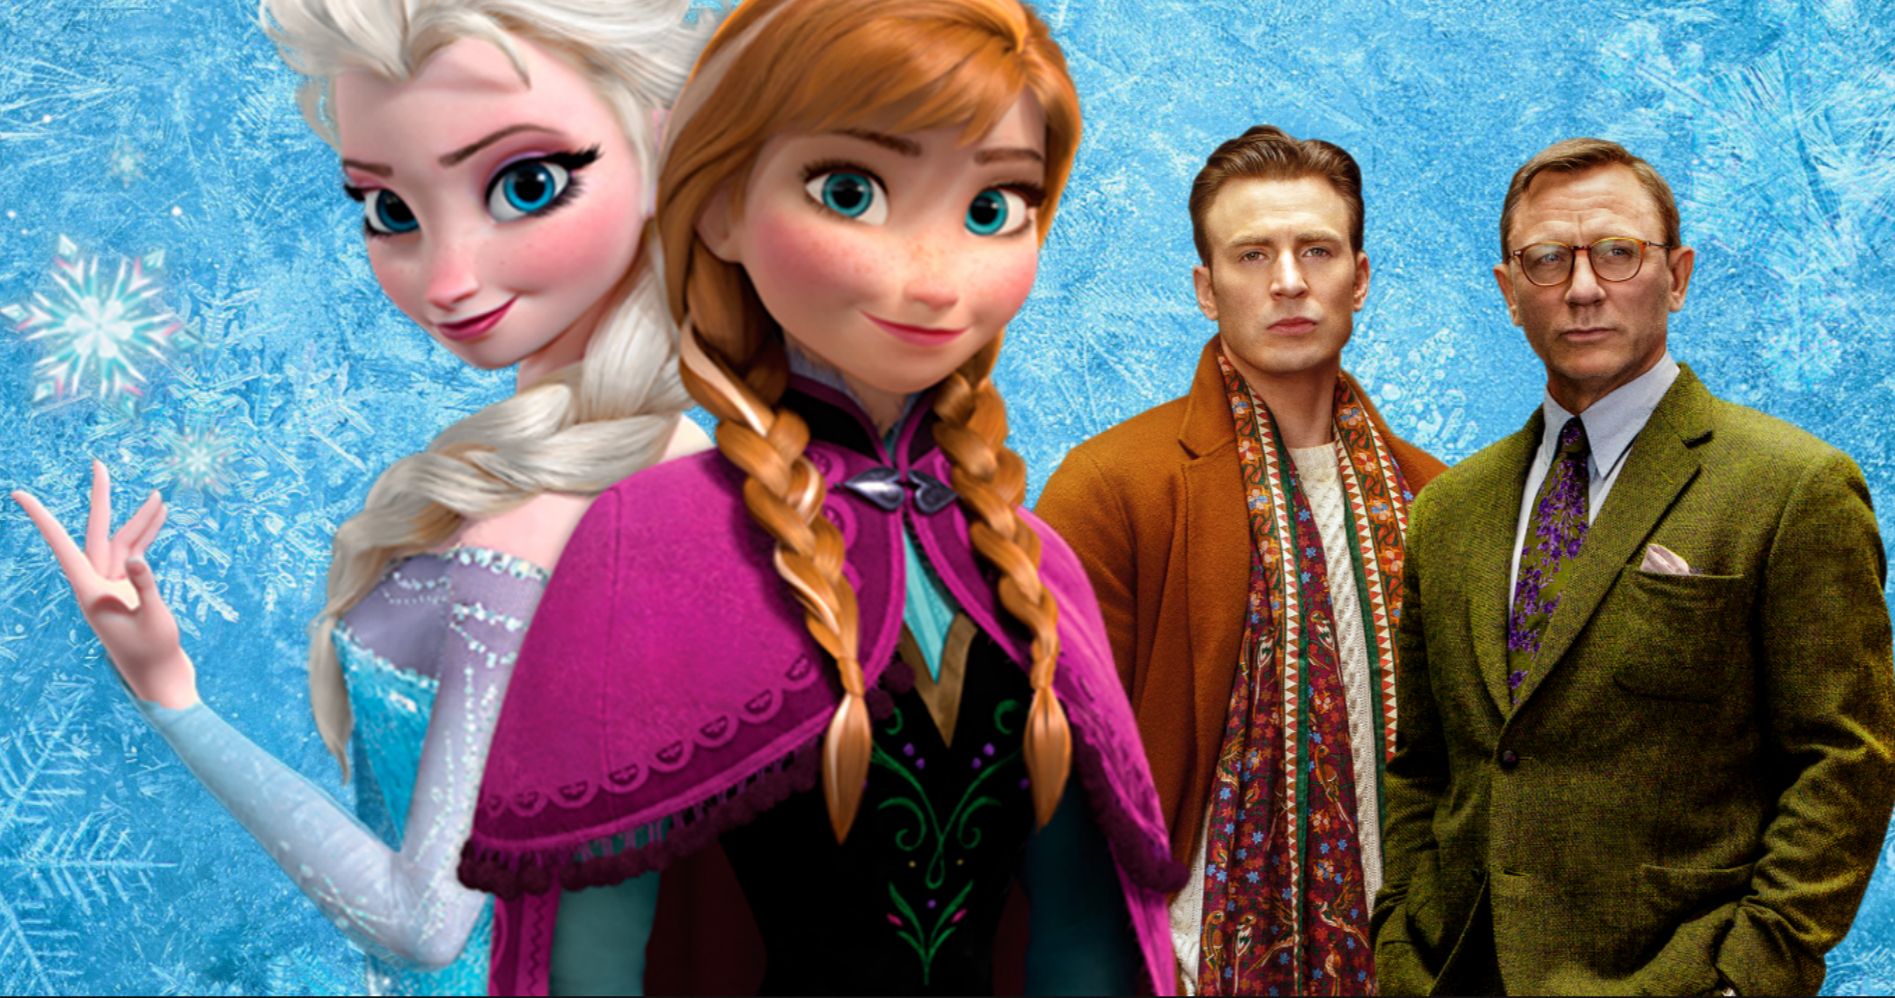 Frozen 2 Breaks Thanksgiving Box Office Records, Knives Out Opens Strong